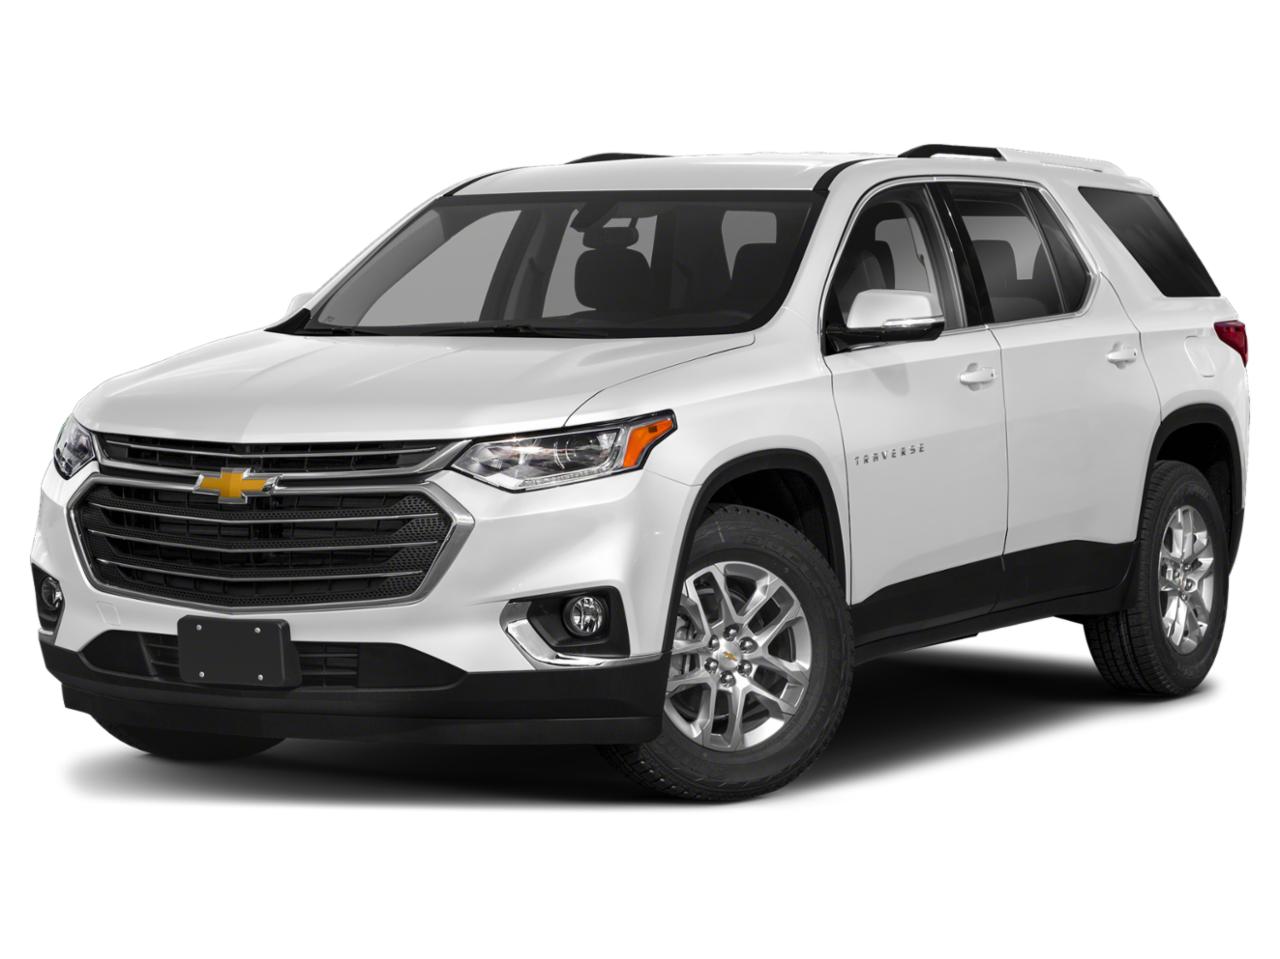 2018 Chevrolet Traverse Vehicle Photo in Saint Charles, IL 60174